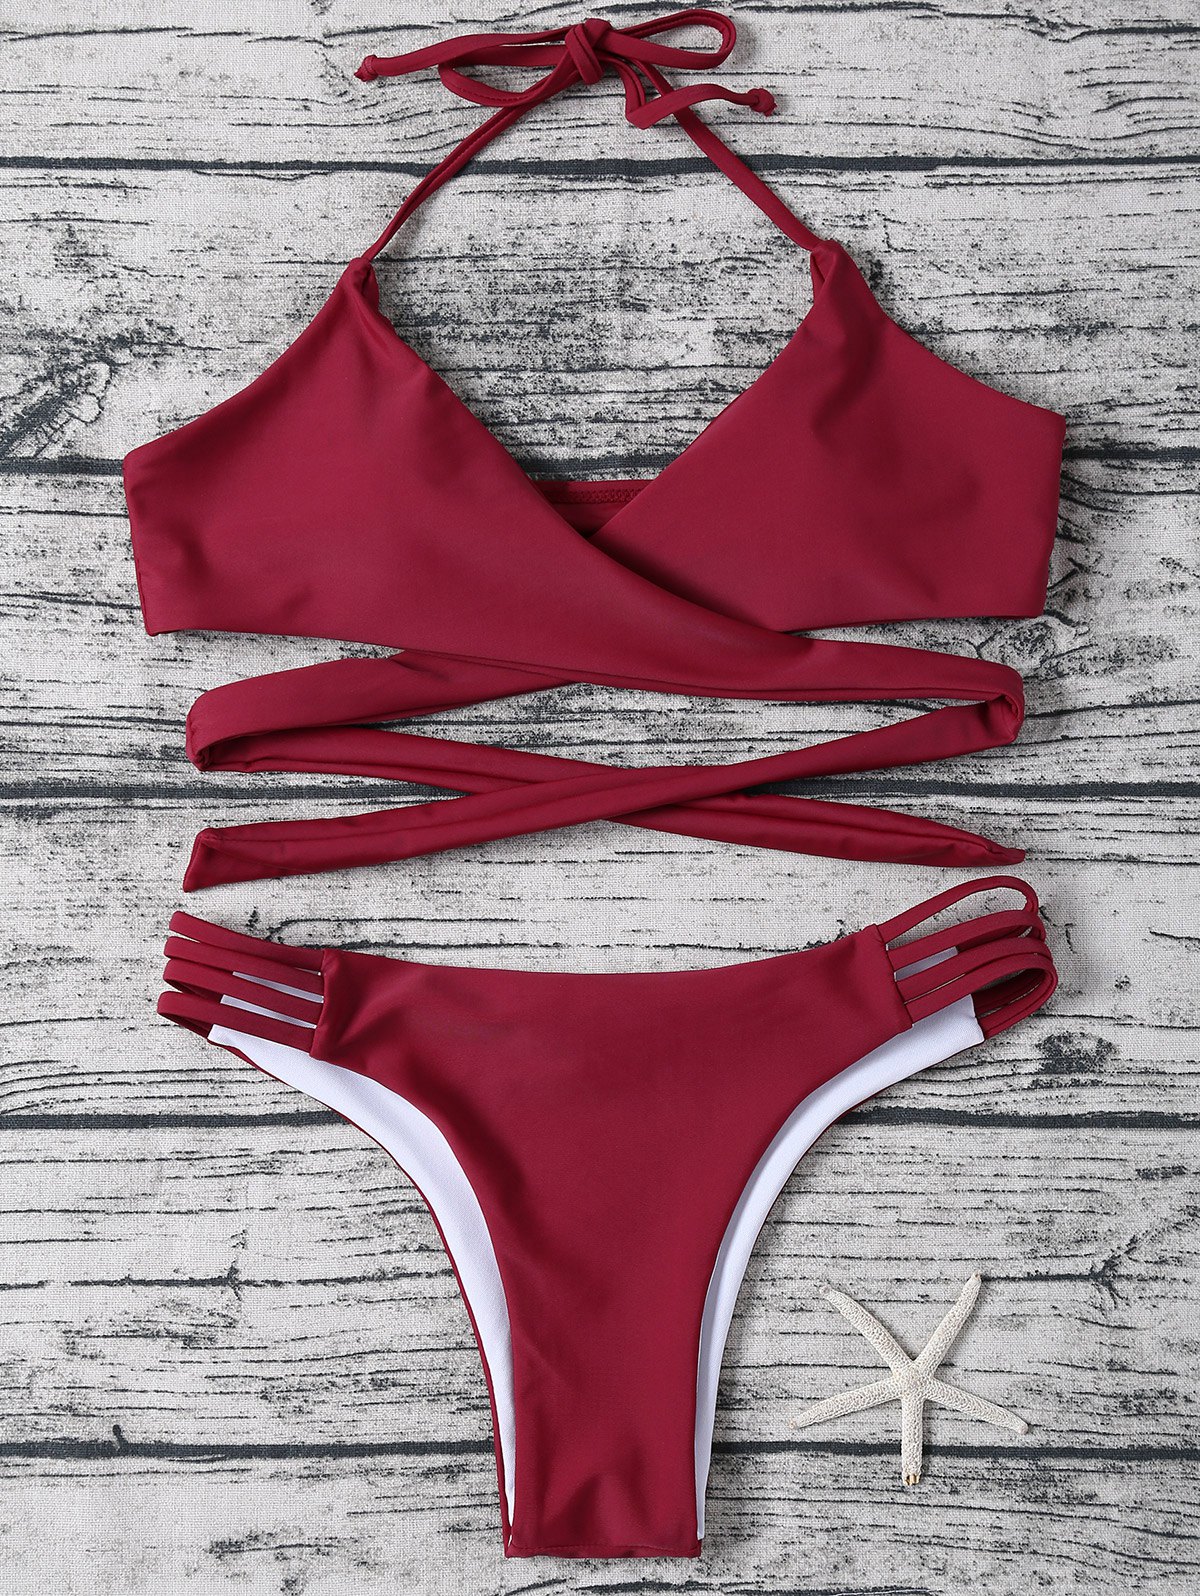 Swimsuit Tips:How To Make Them Last Longer And Keep Their Shape?